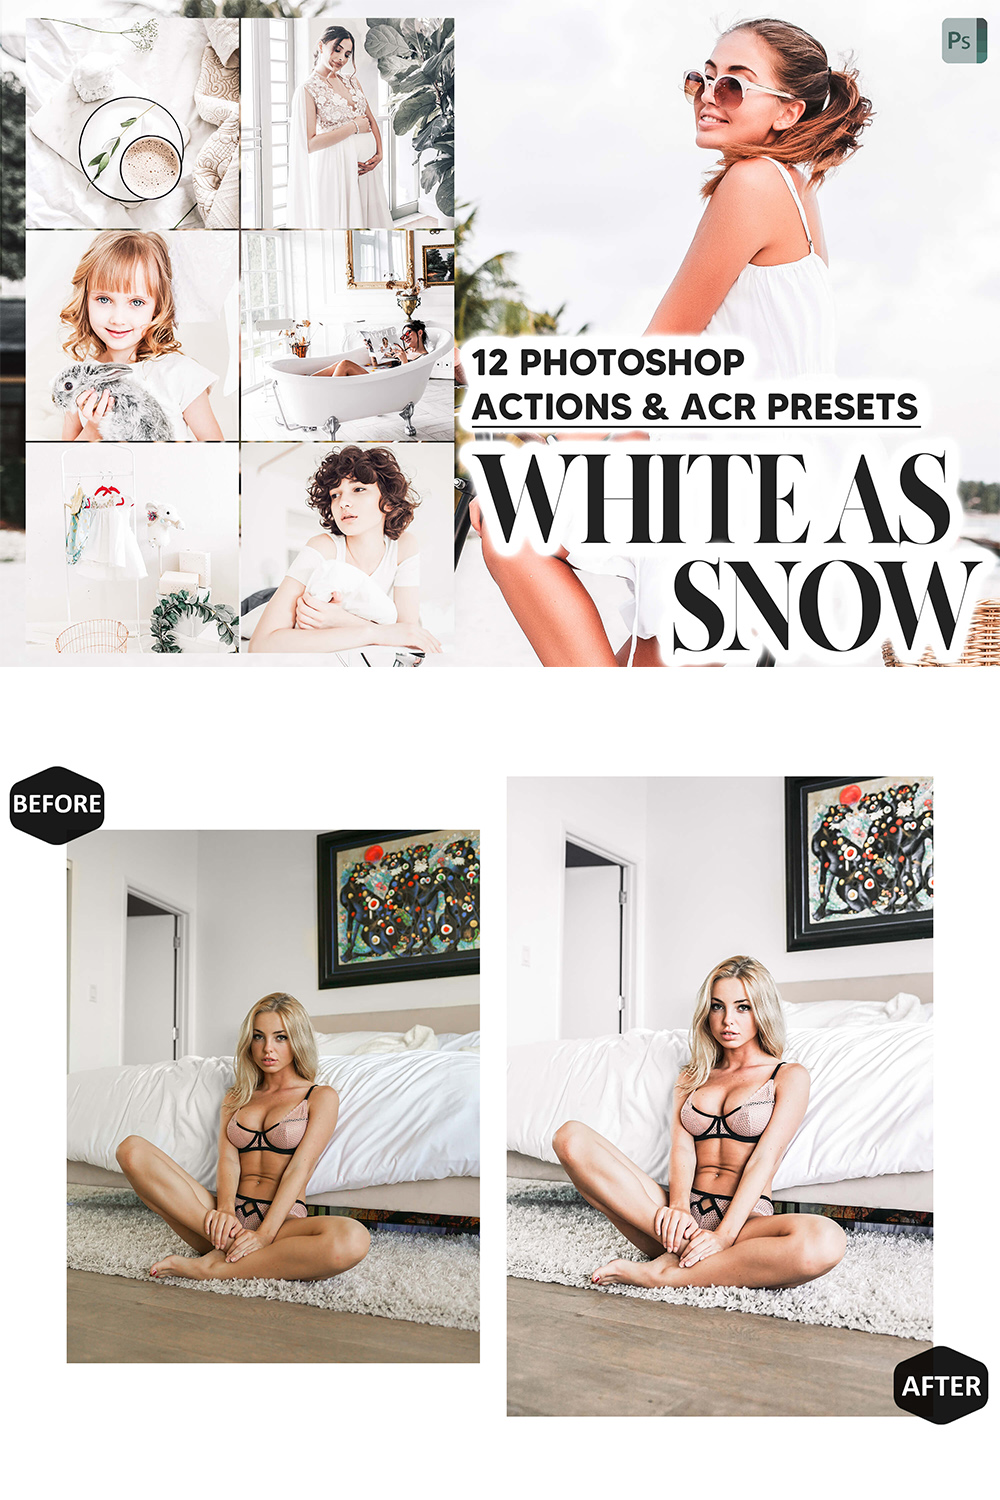 12 Photoshop Actions, White As Snow Ps Action, Bright ACR Preset, Airy Ps Filter, Atn Portrait And Lifestyle Theme For Instagram, Blogger pinterest preview image.